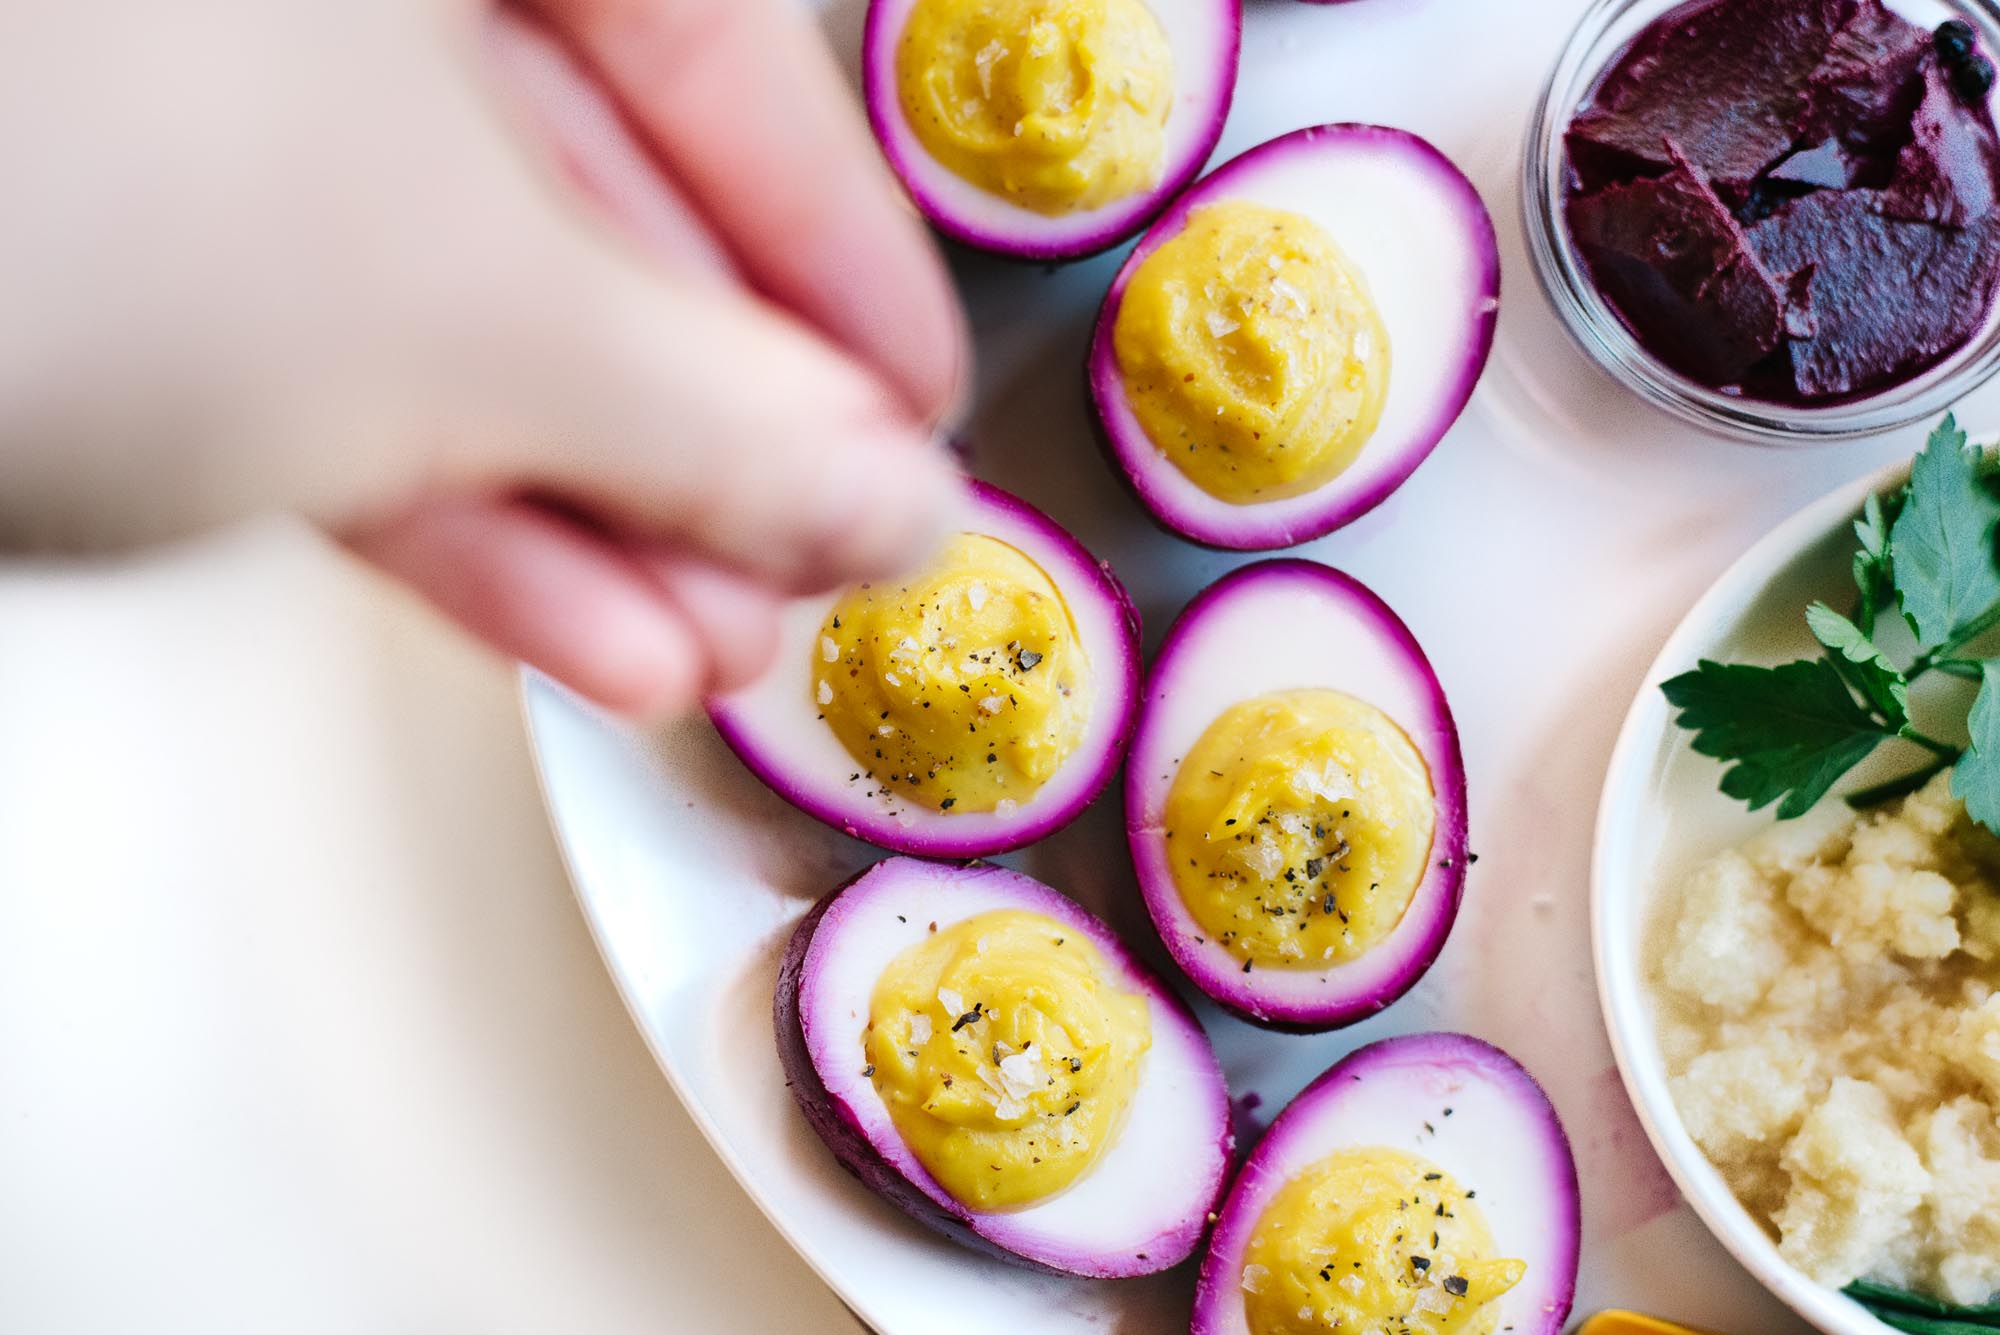 Vegetarian Passover Seder Plate with Beet-Pickled Deviled Eggs